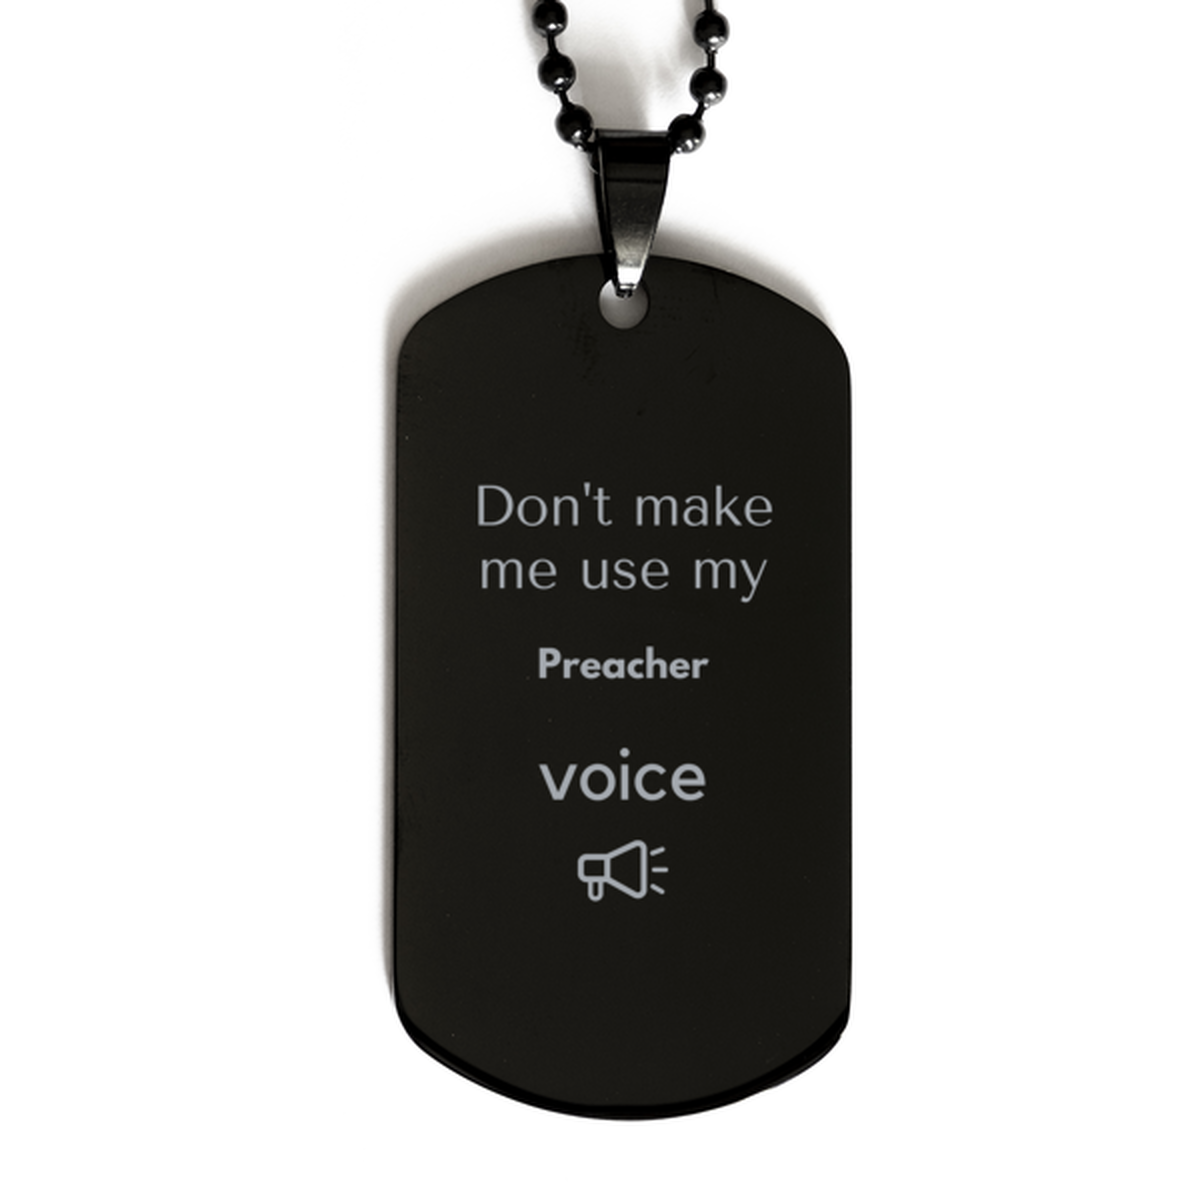 Don't make me use my Preacher voice, Sarcasm Preacher Gifts, Christmas Preacher Black Dog Tag Birthday Unique Gifts For Preacher Coworkers, Men, Women, Colleague, Friends